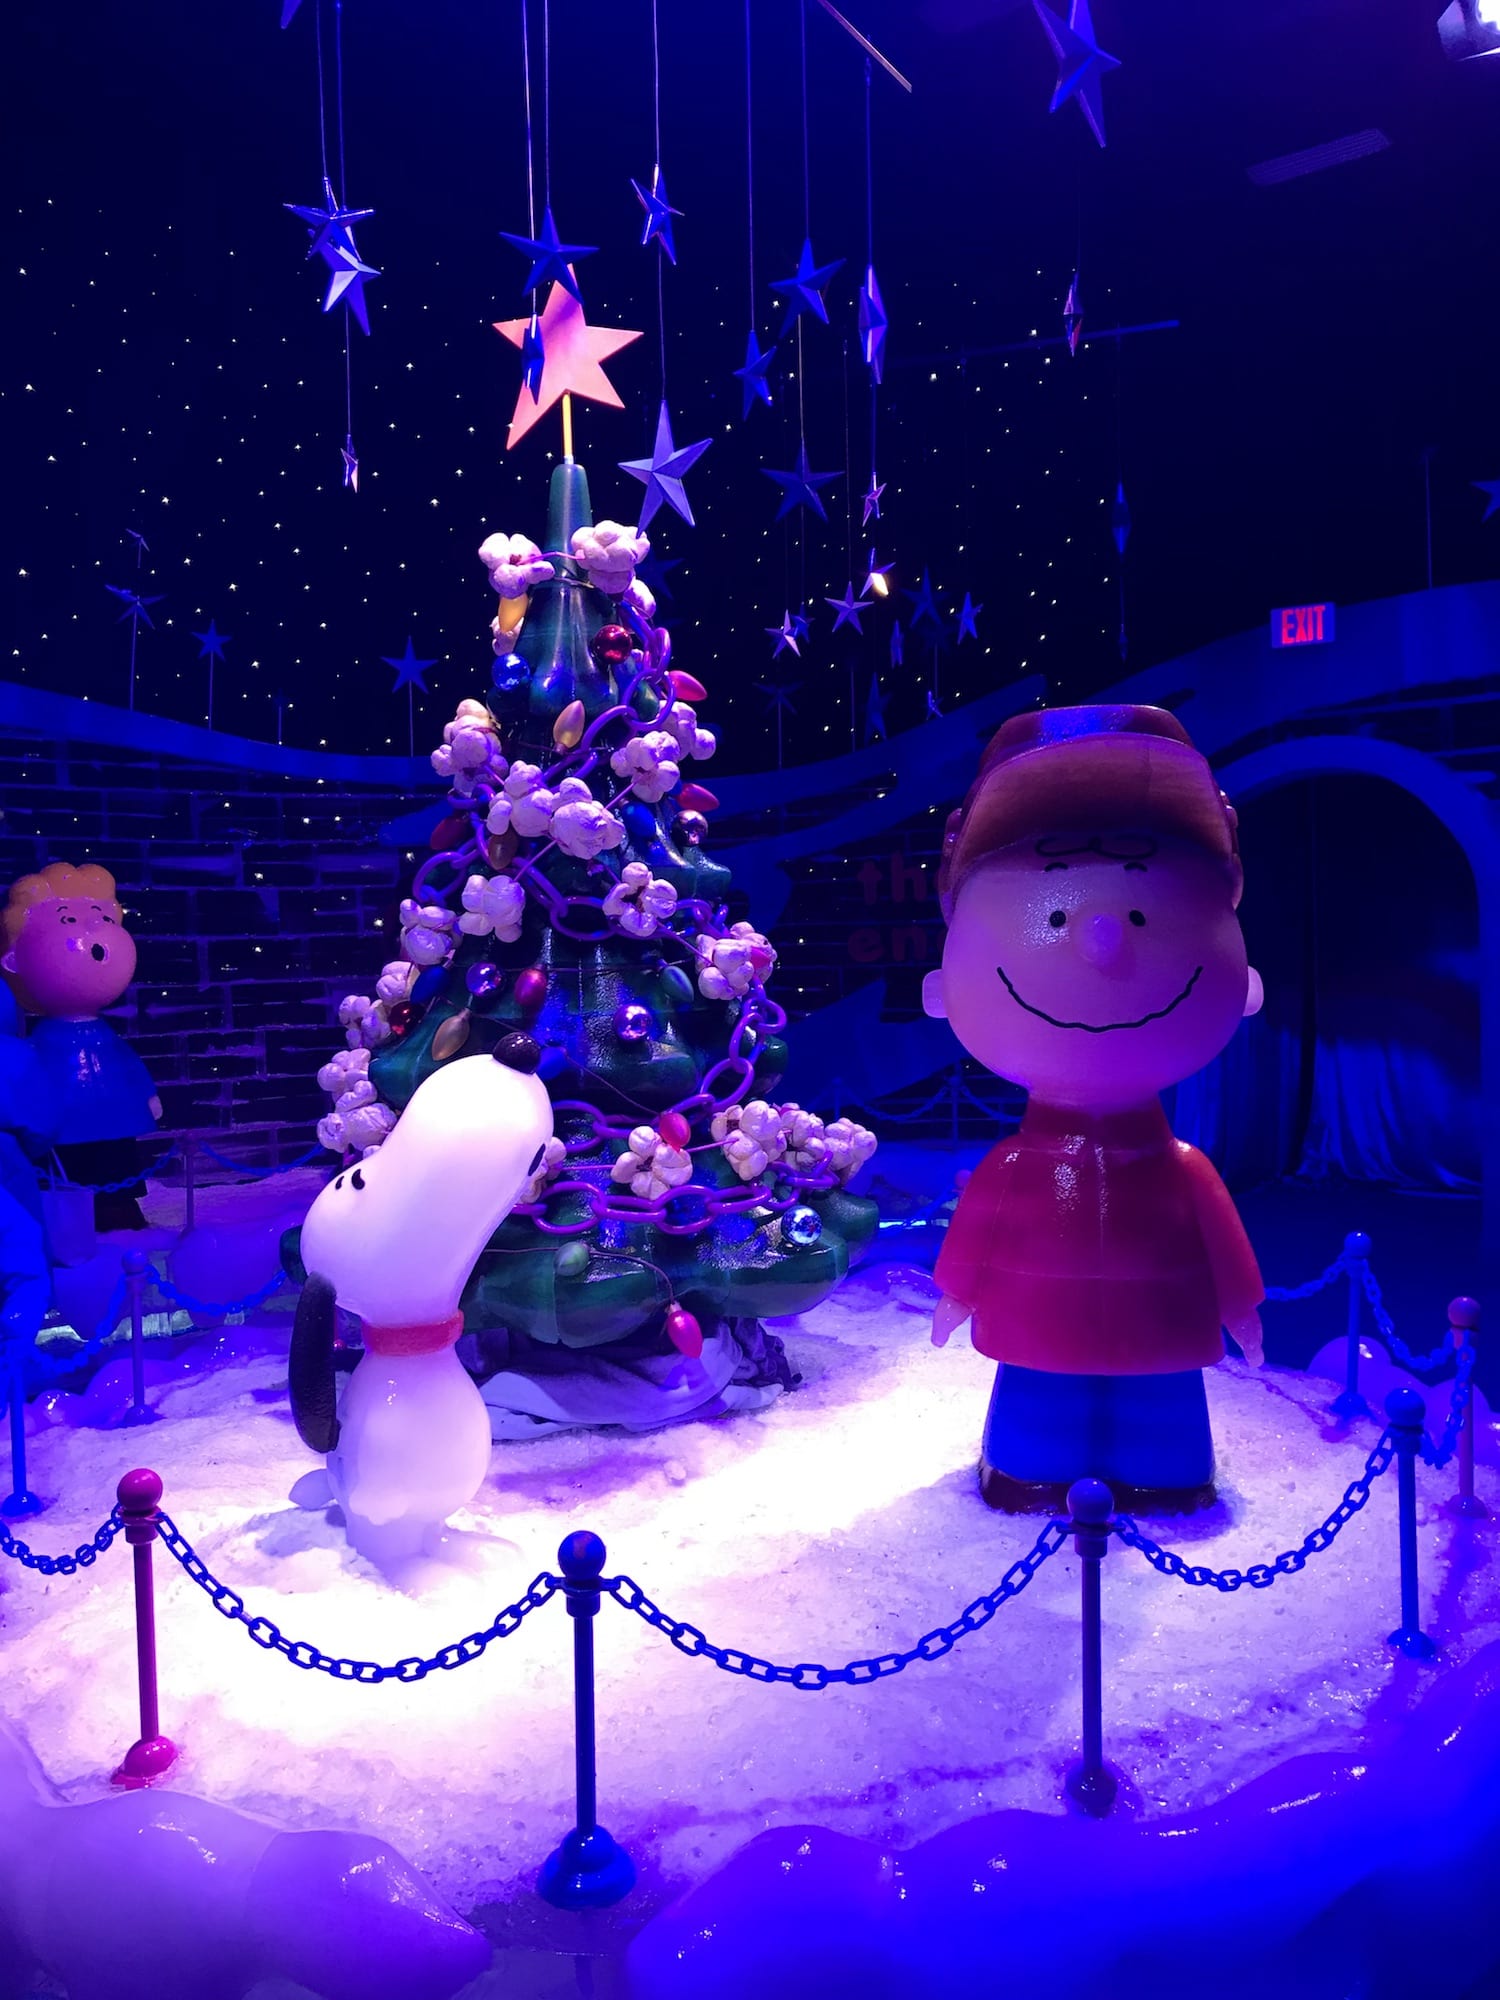 ICE! Charlie Brown Christmas at Gaylord Opryland